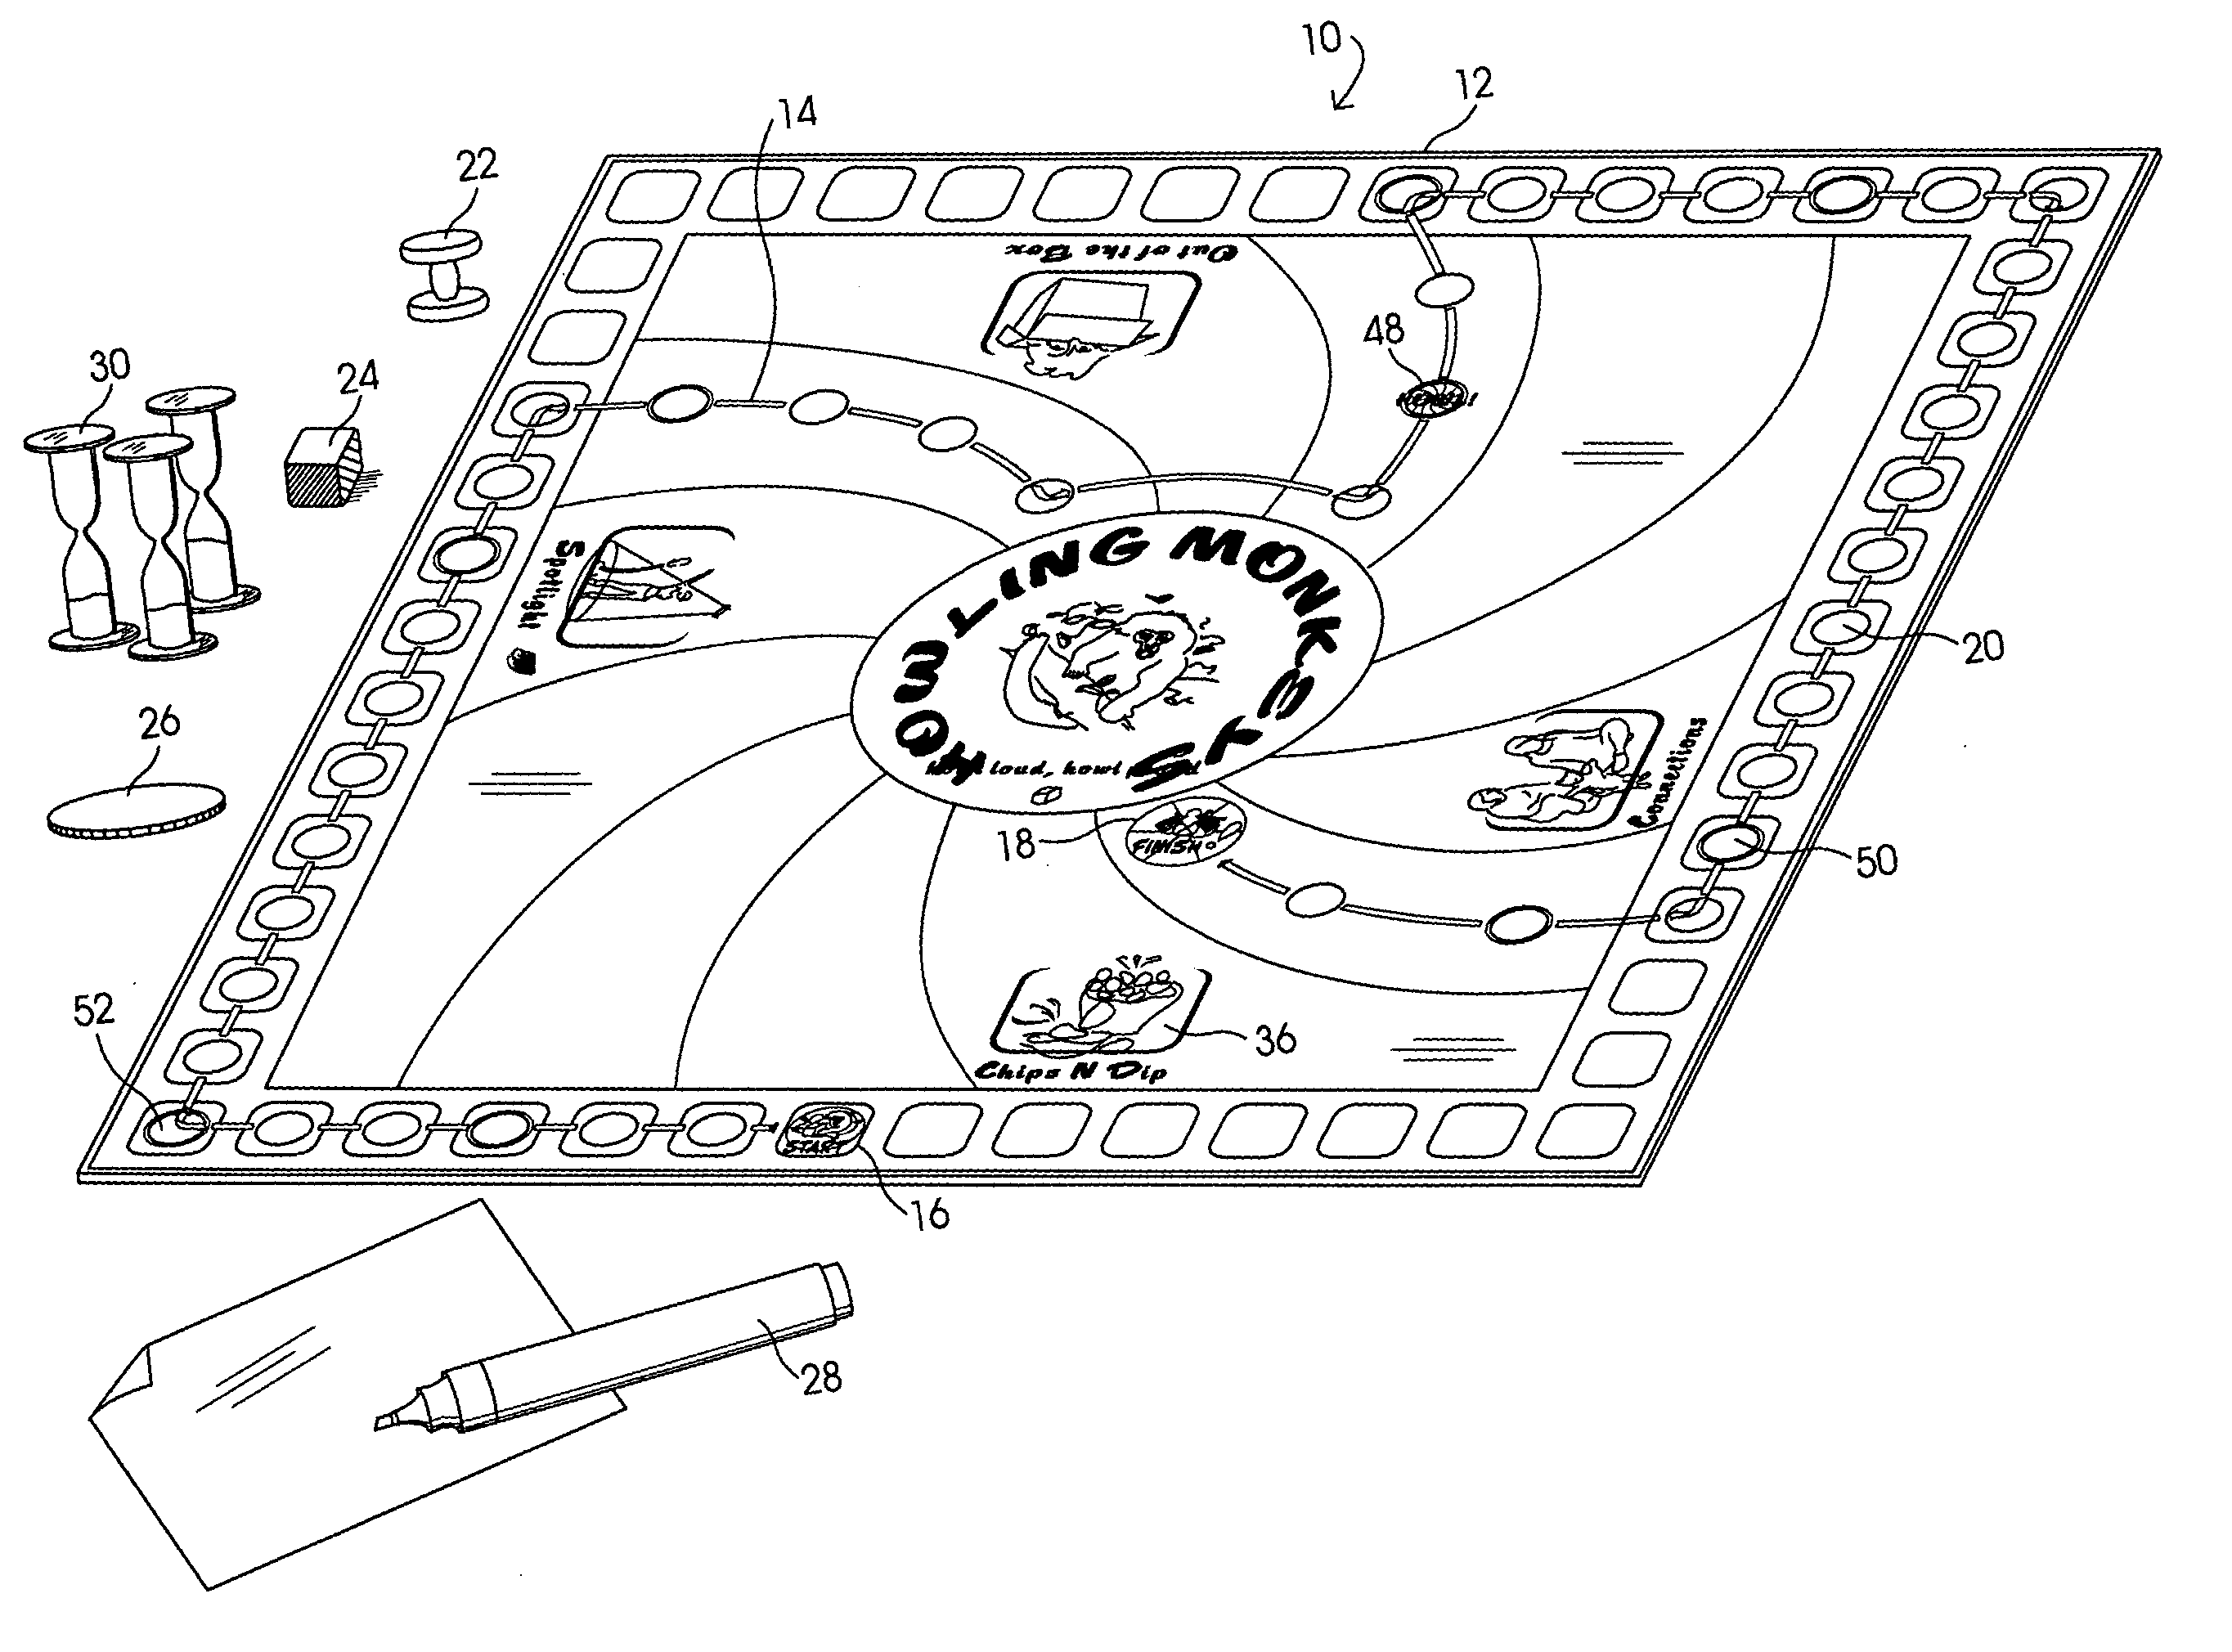 Educational board game and method of playing